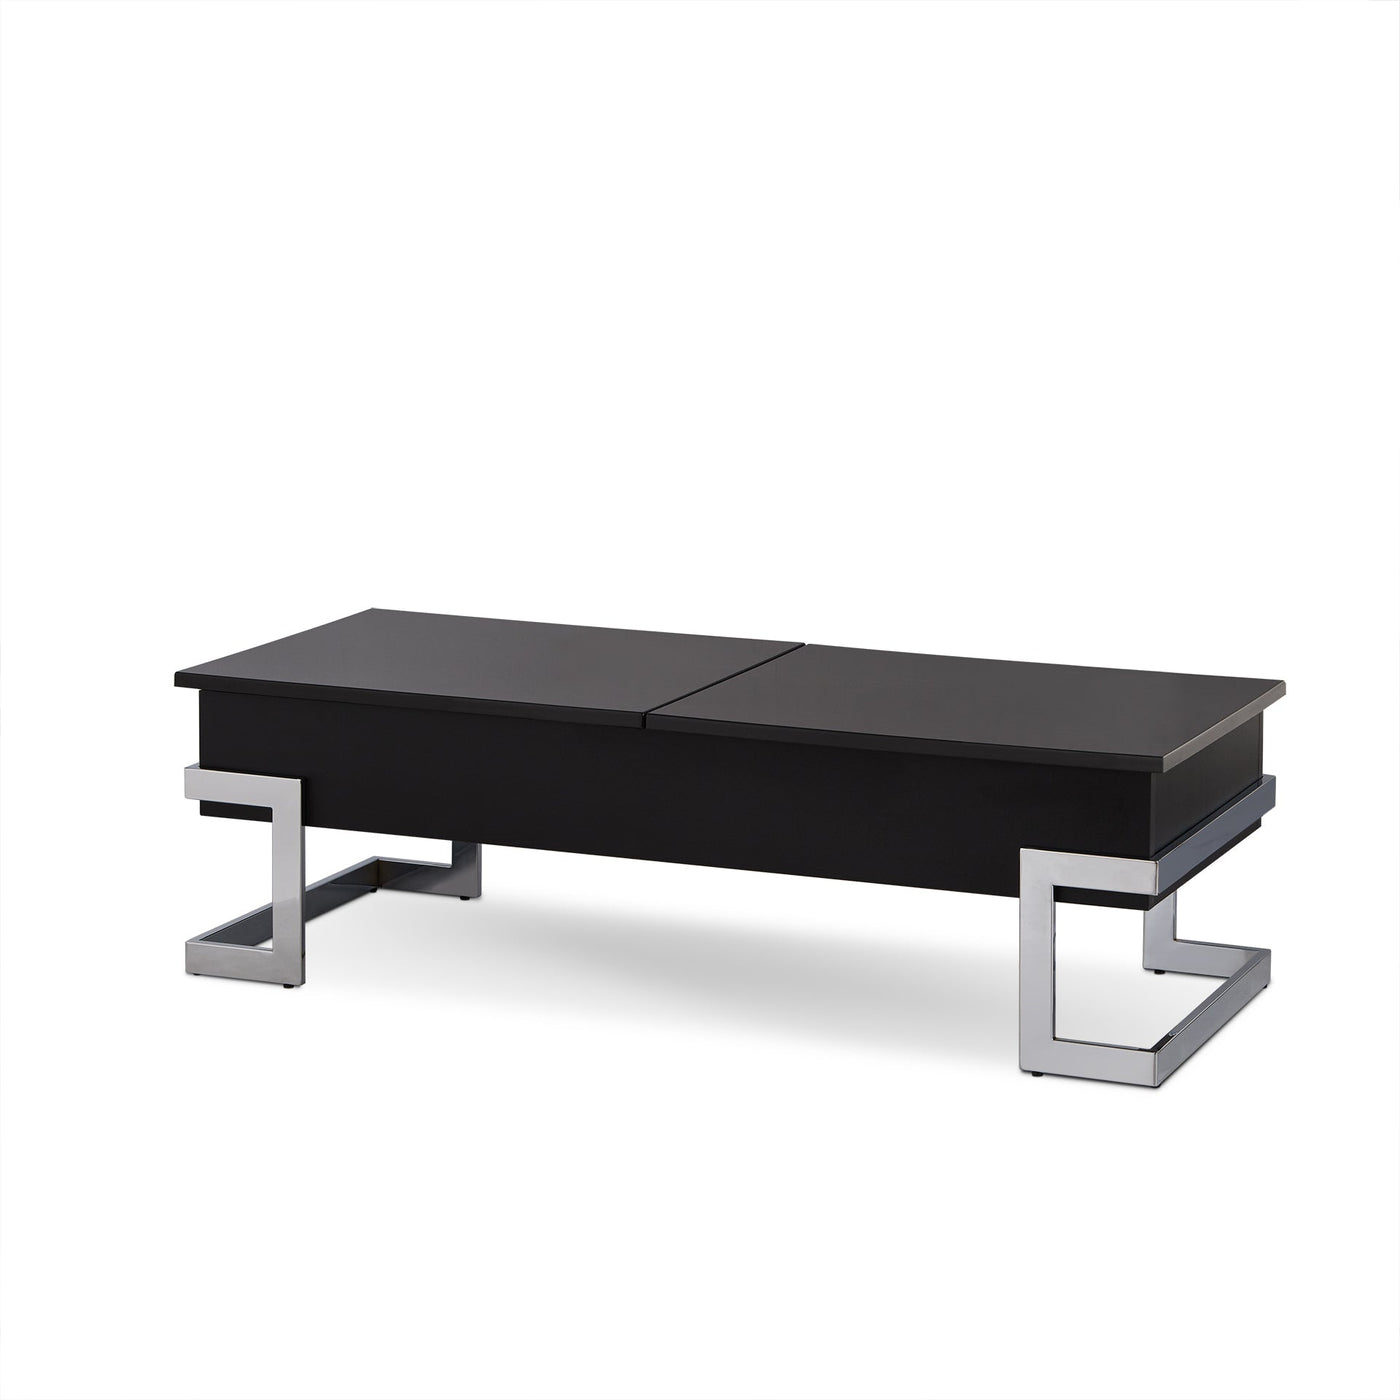 47’ Black And Silver Iron Lift Top Coffee Table - Coffee Tables